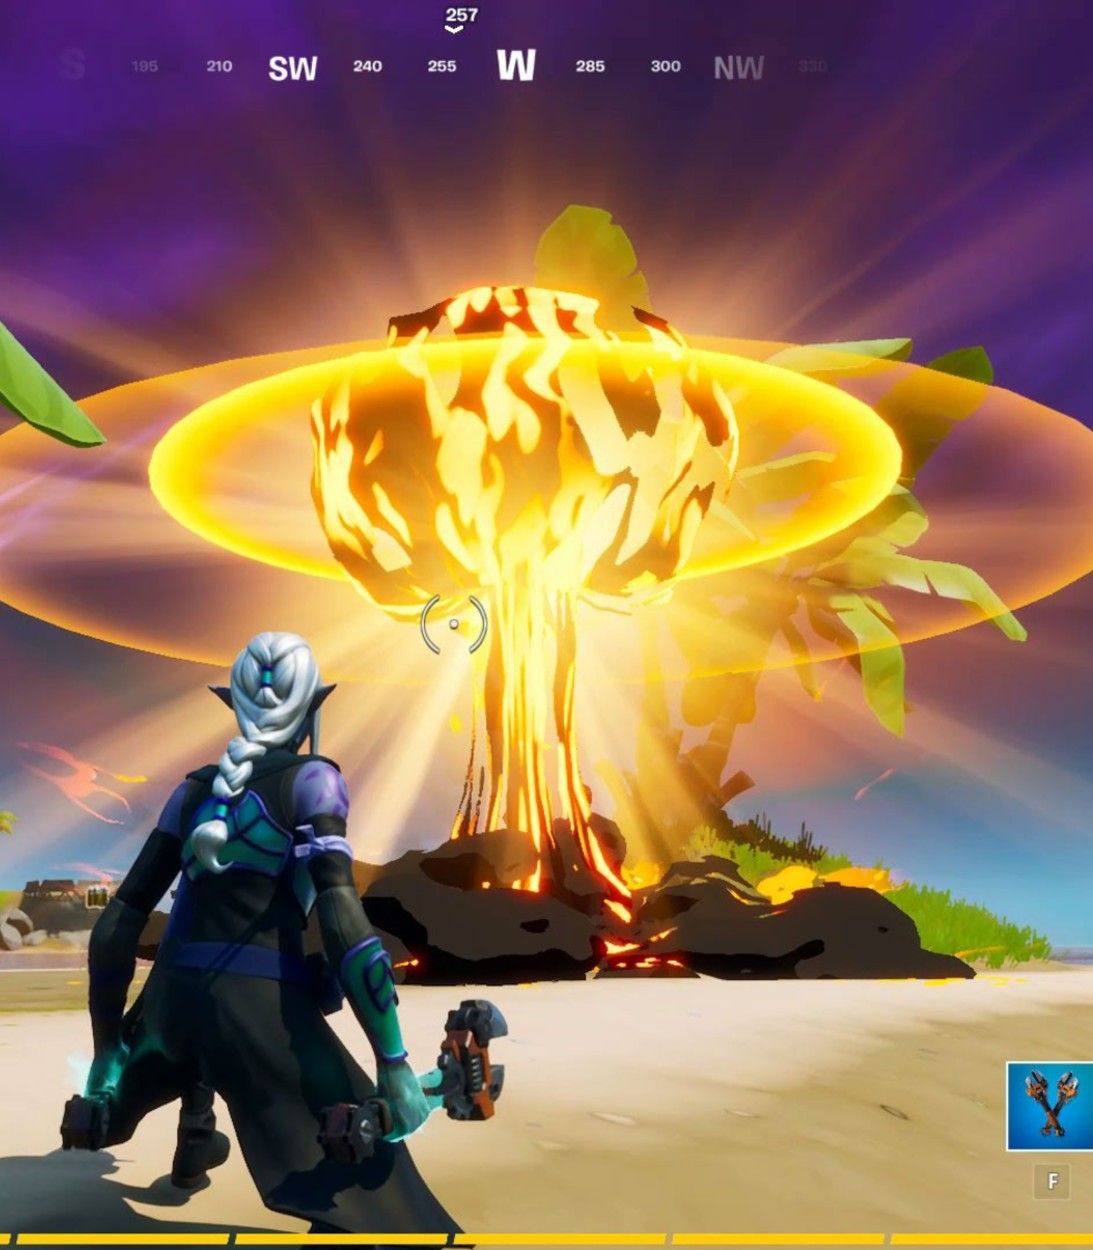 A player helps the Coral Buddies enter the nuclear age in a Fortnite Season 3 secret challenge.